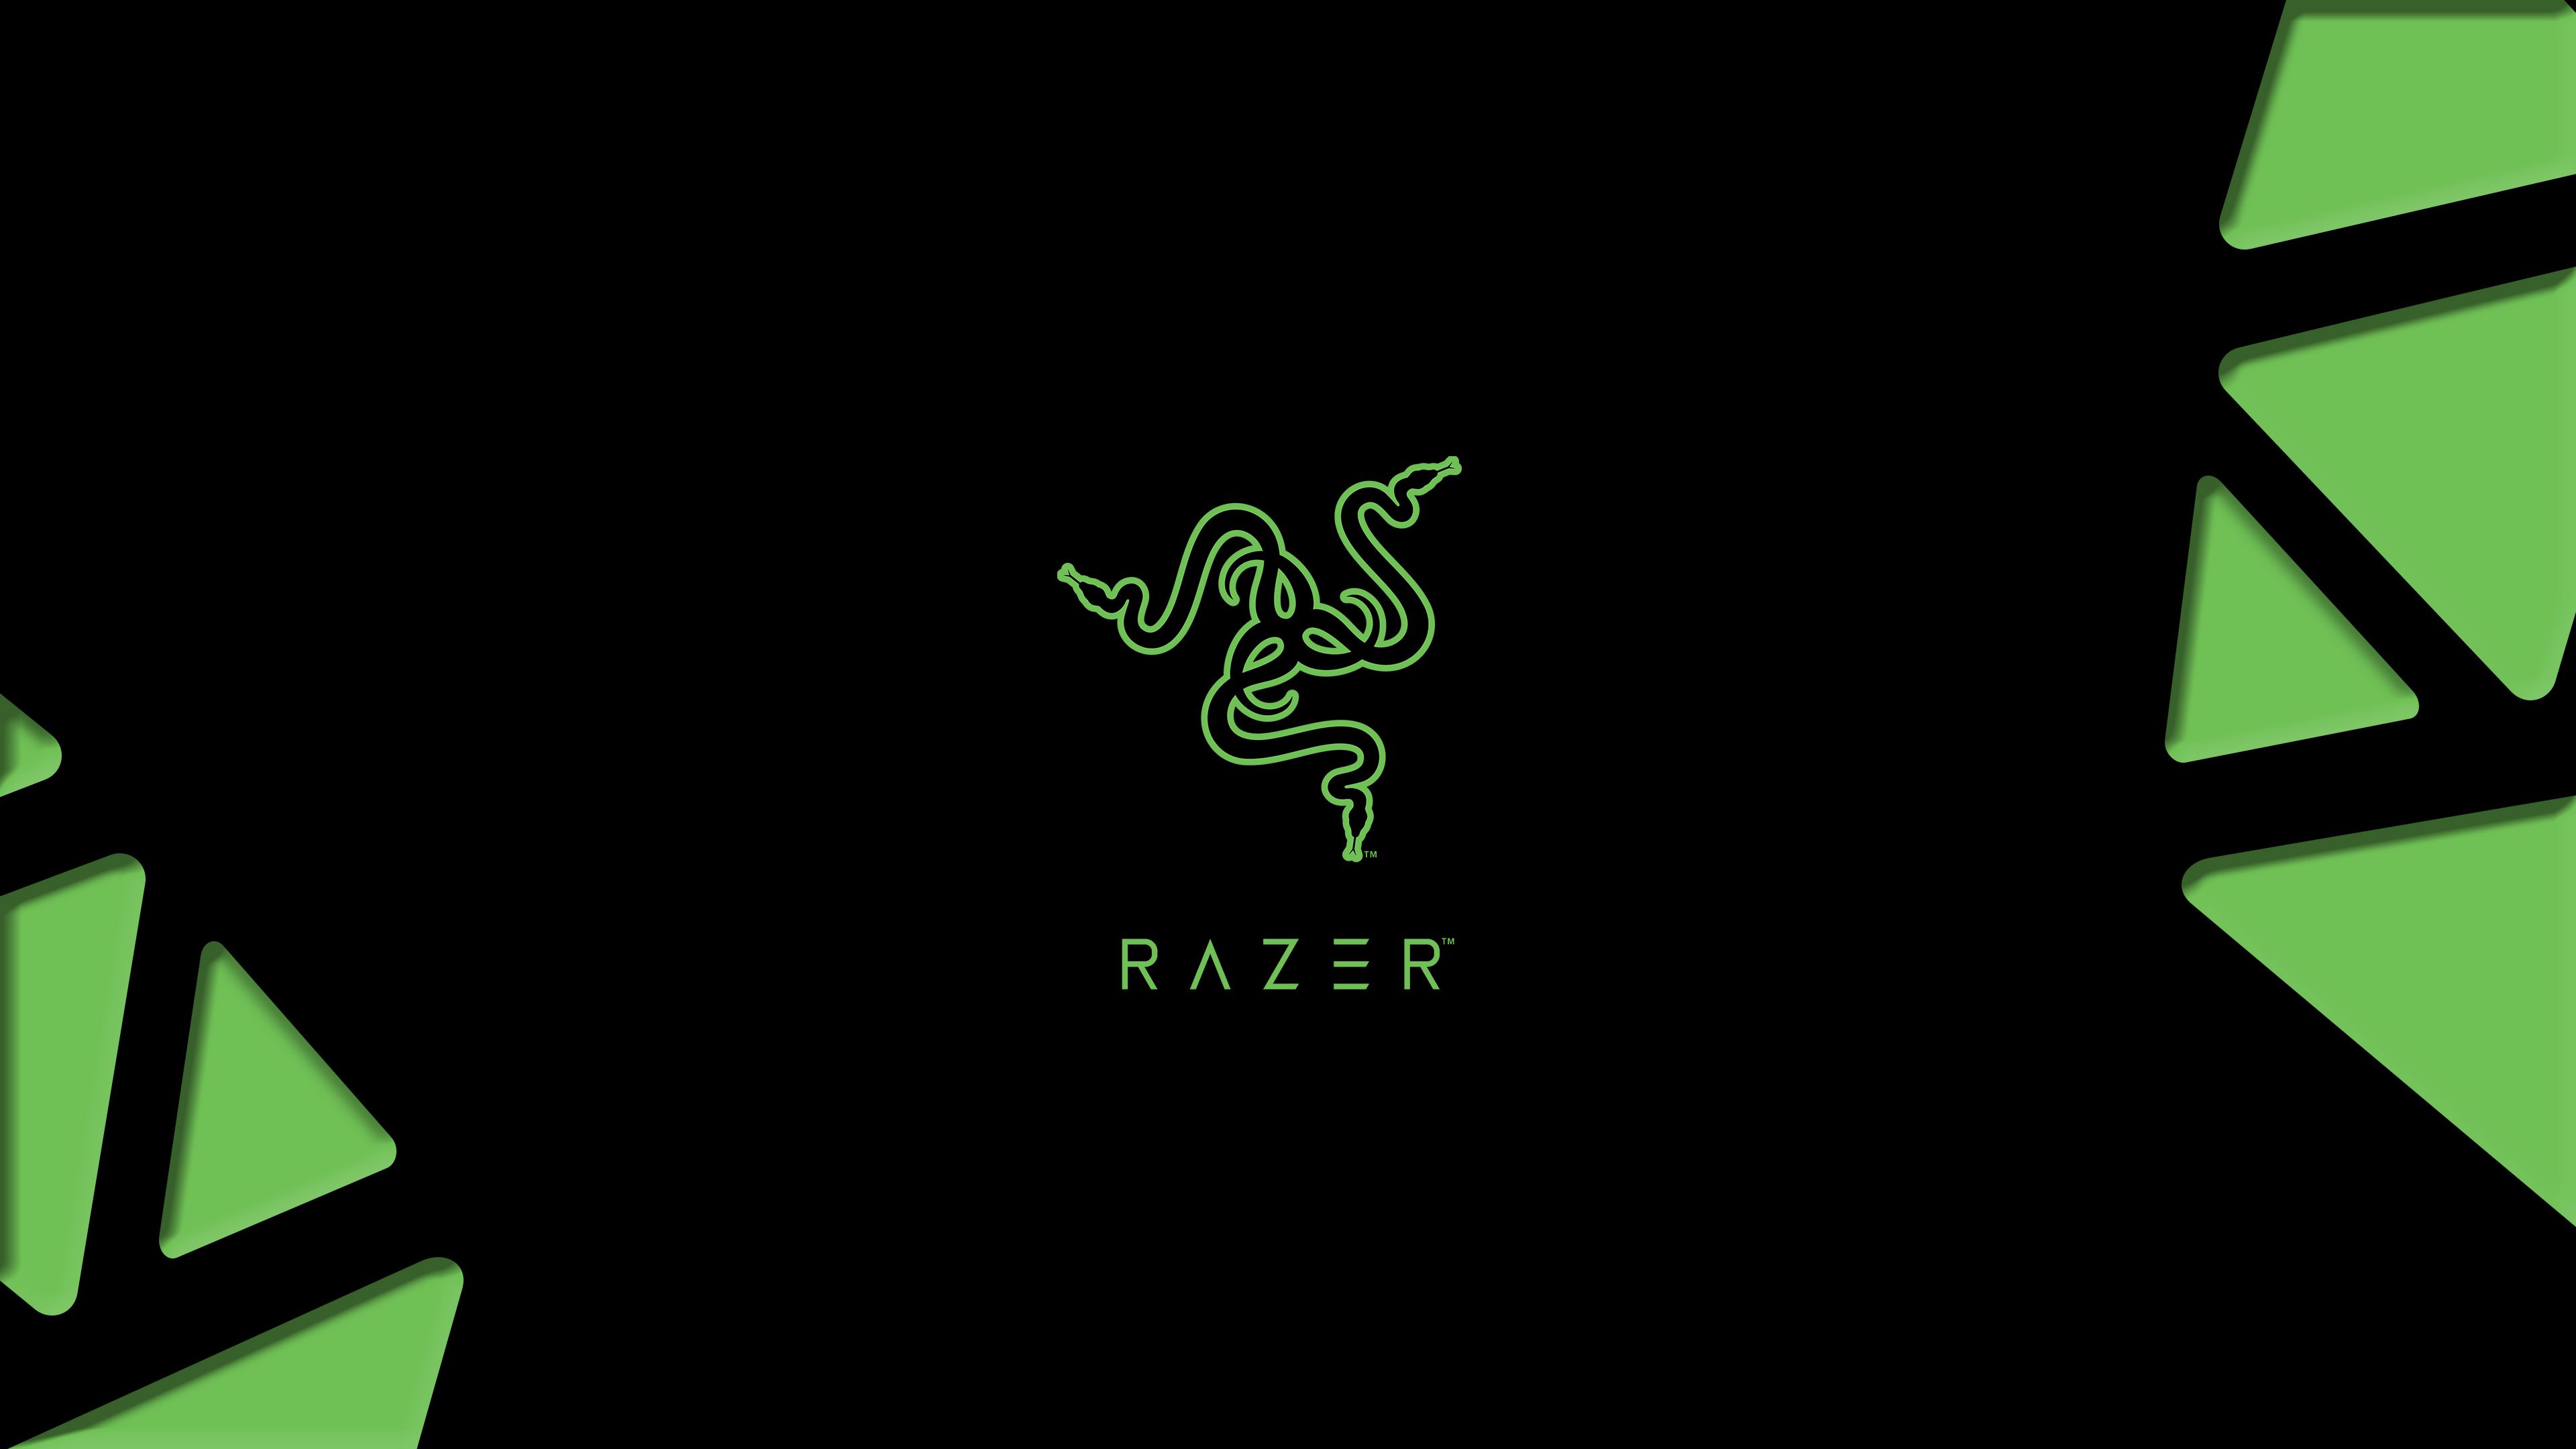 Razer Background 4k 1366x768 Resolution HD 4k Wallpaper, Image, Background, Photo and Picture